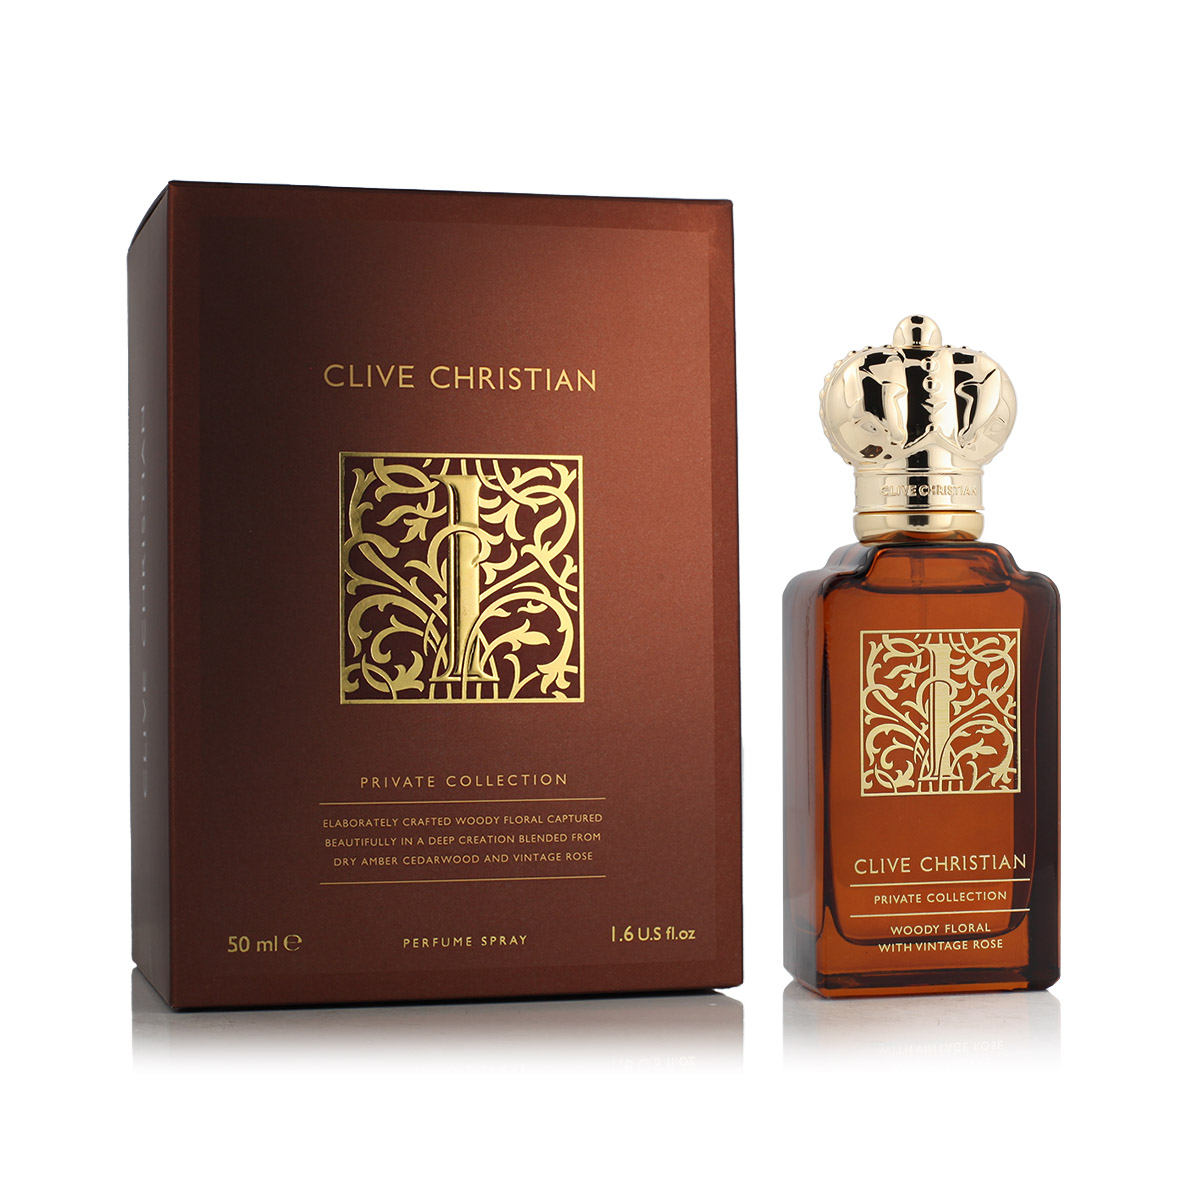 Clive Christian I for Women Woody Floral With Vintage Rose 50ml NIŠINIAI Kvepalai Moterims